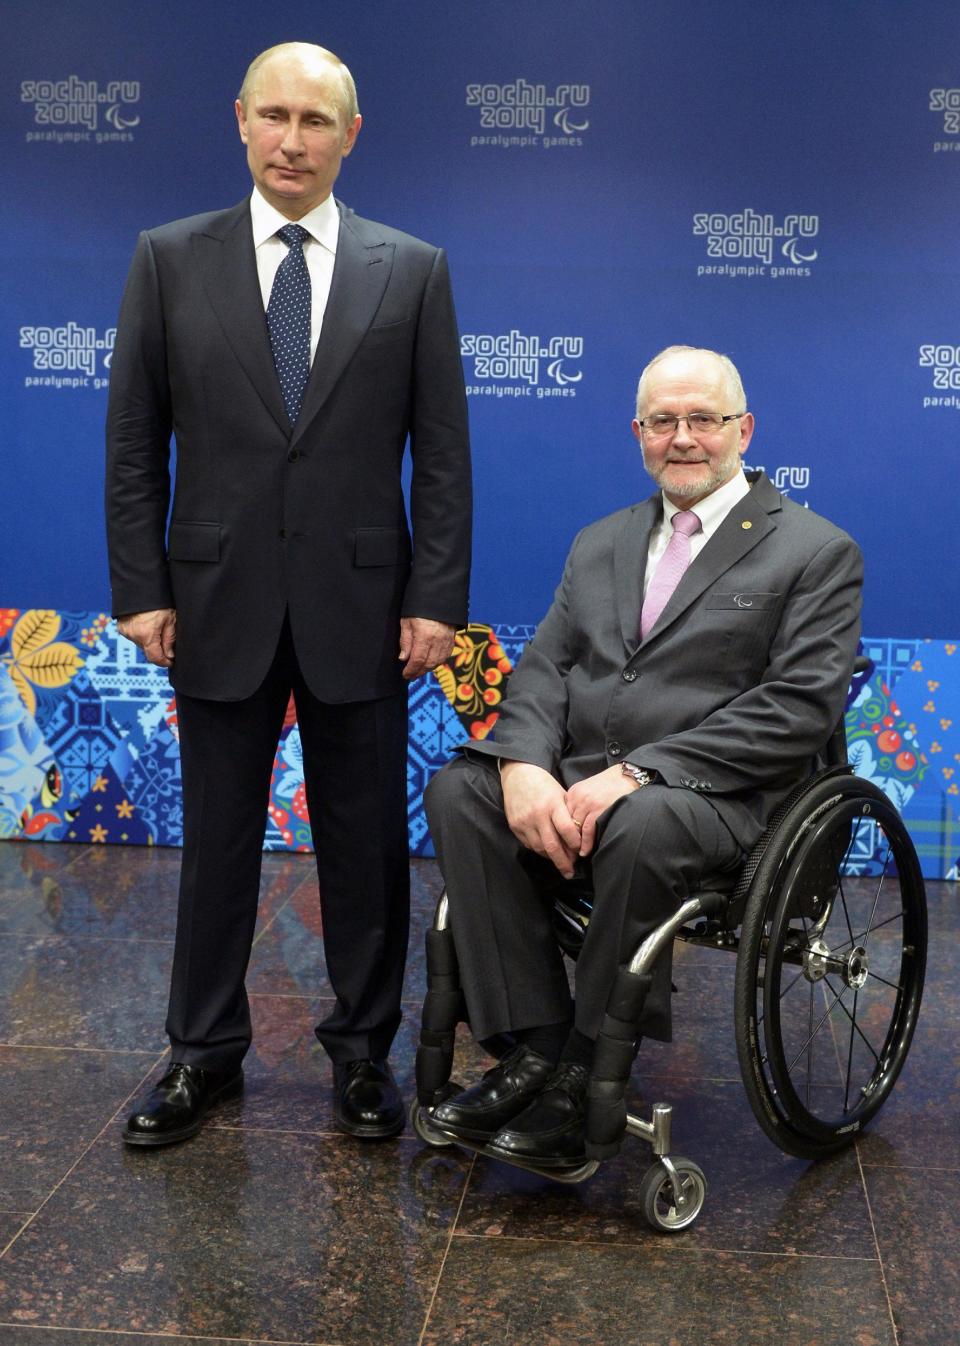 Russian President Vladimir Putin, left, and International Paralympic Committee President Philip Craven pose at a meeting with International Paralympic Committee board members and honorary council members before the opening ceremony of the 2014 Winter Paralympics in Sochi, Russia, Friday, March 7, 2014. (AP Photo/RIA-Novosti, Alexei Nikolsky, Presidential Press Service)